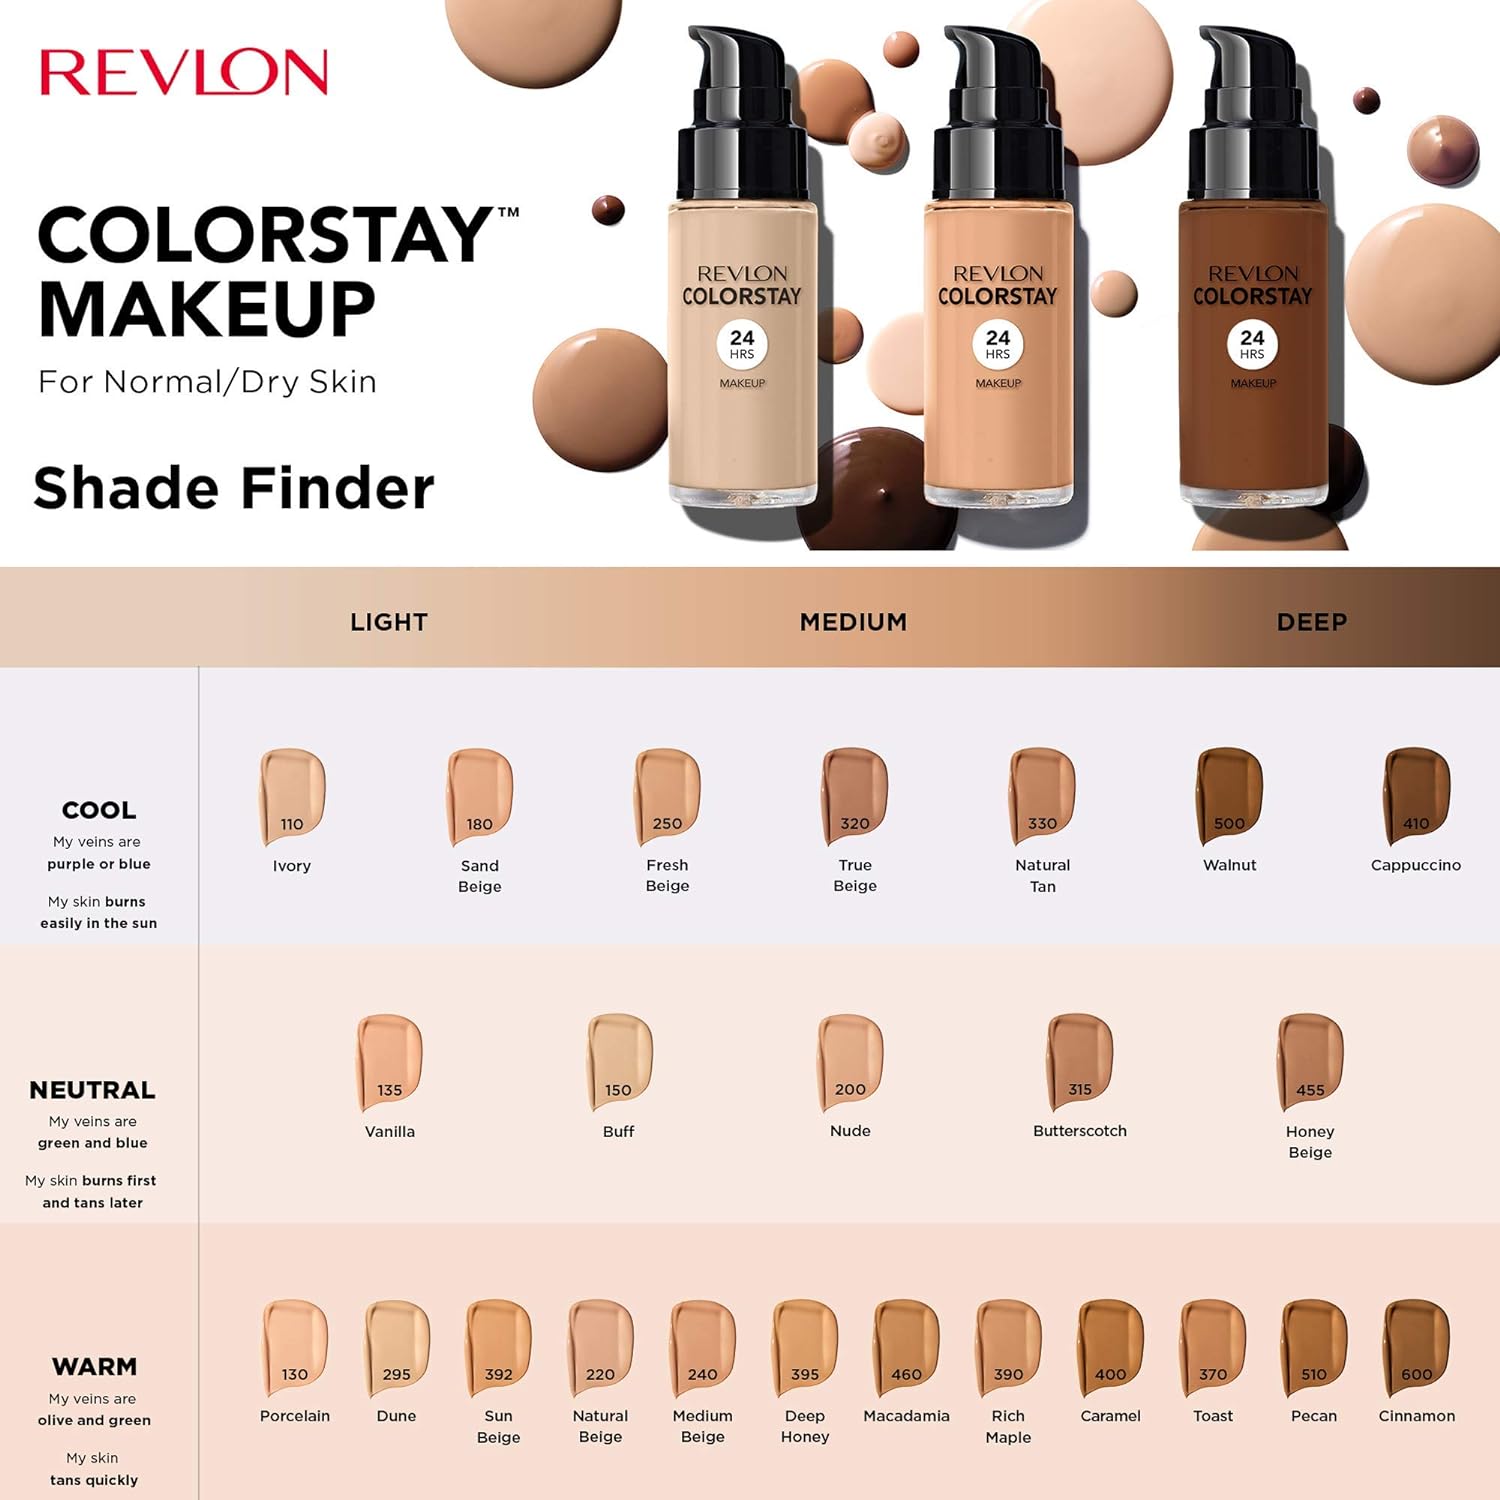 Revlon ColorStay Foundation SPF 20 for normal to dry skin - 150 Buff 30ml